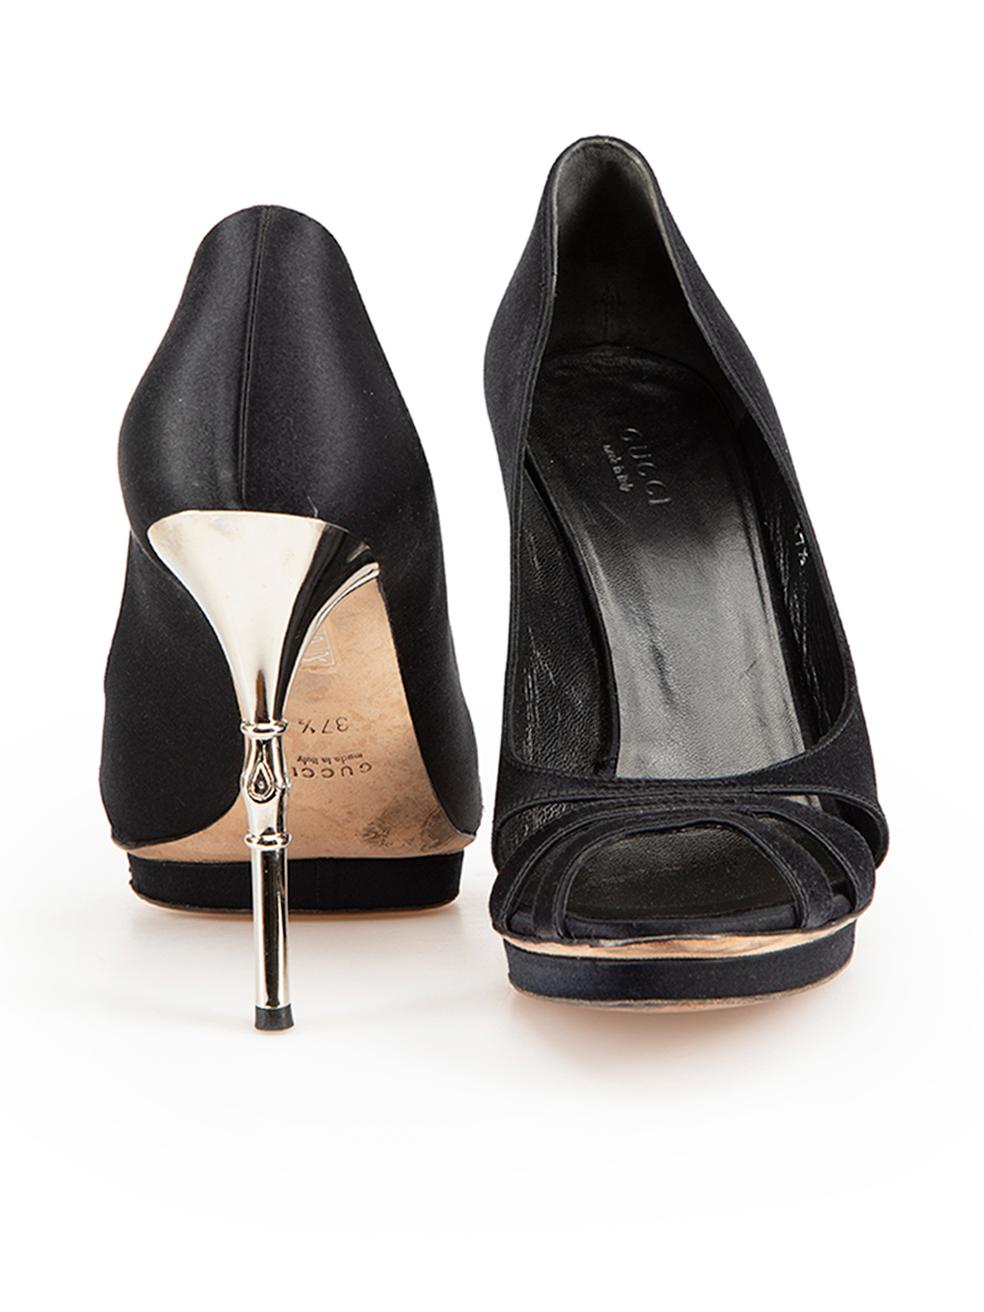 Gucci Black Satin Bamboo Heels Size IT 37.5 In Excellent Condition For Sale In London, GB